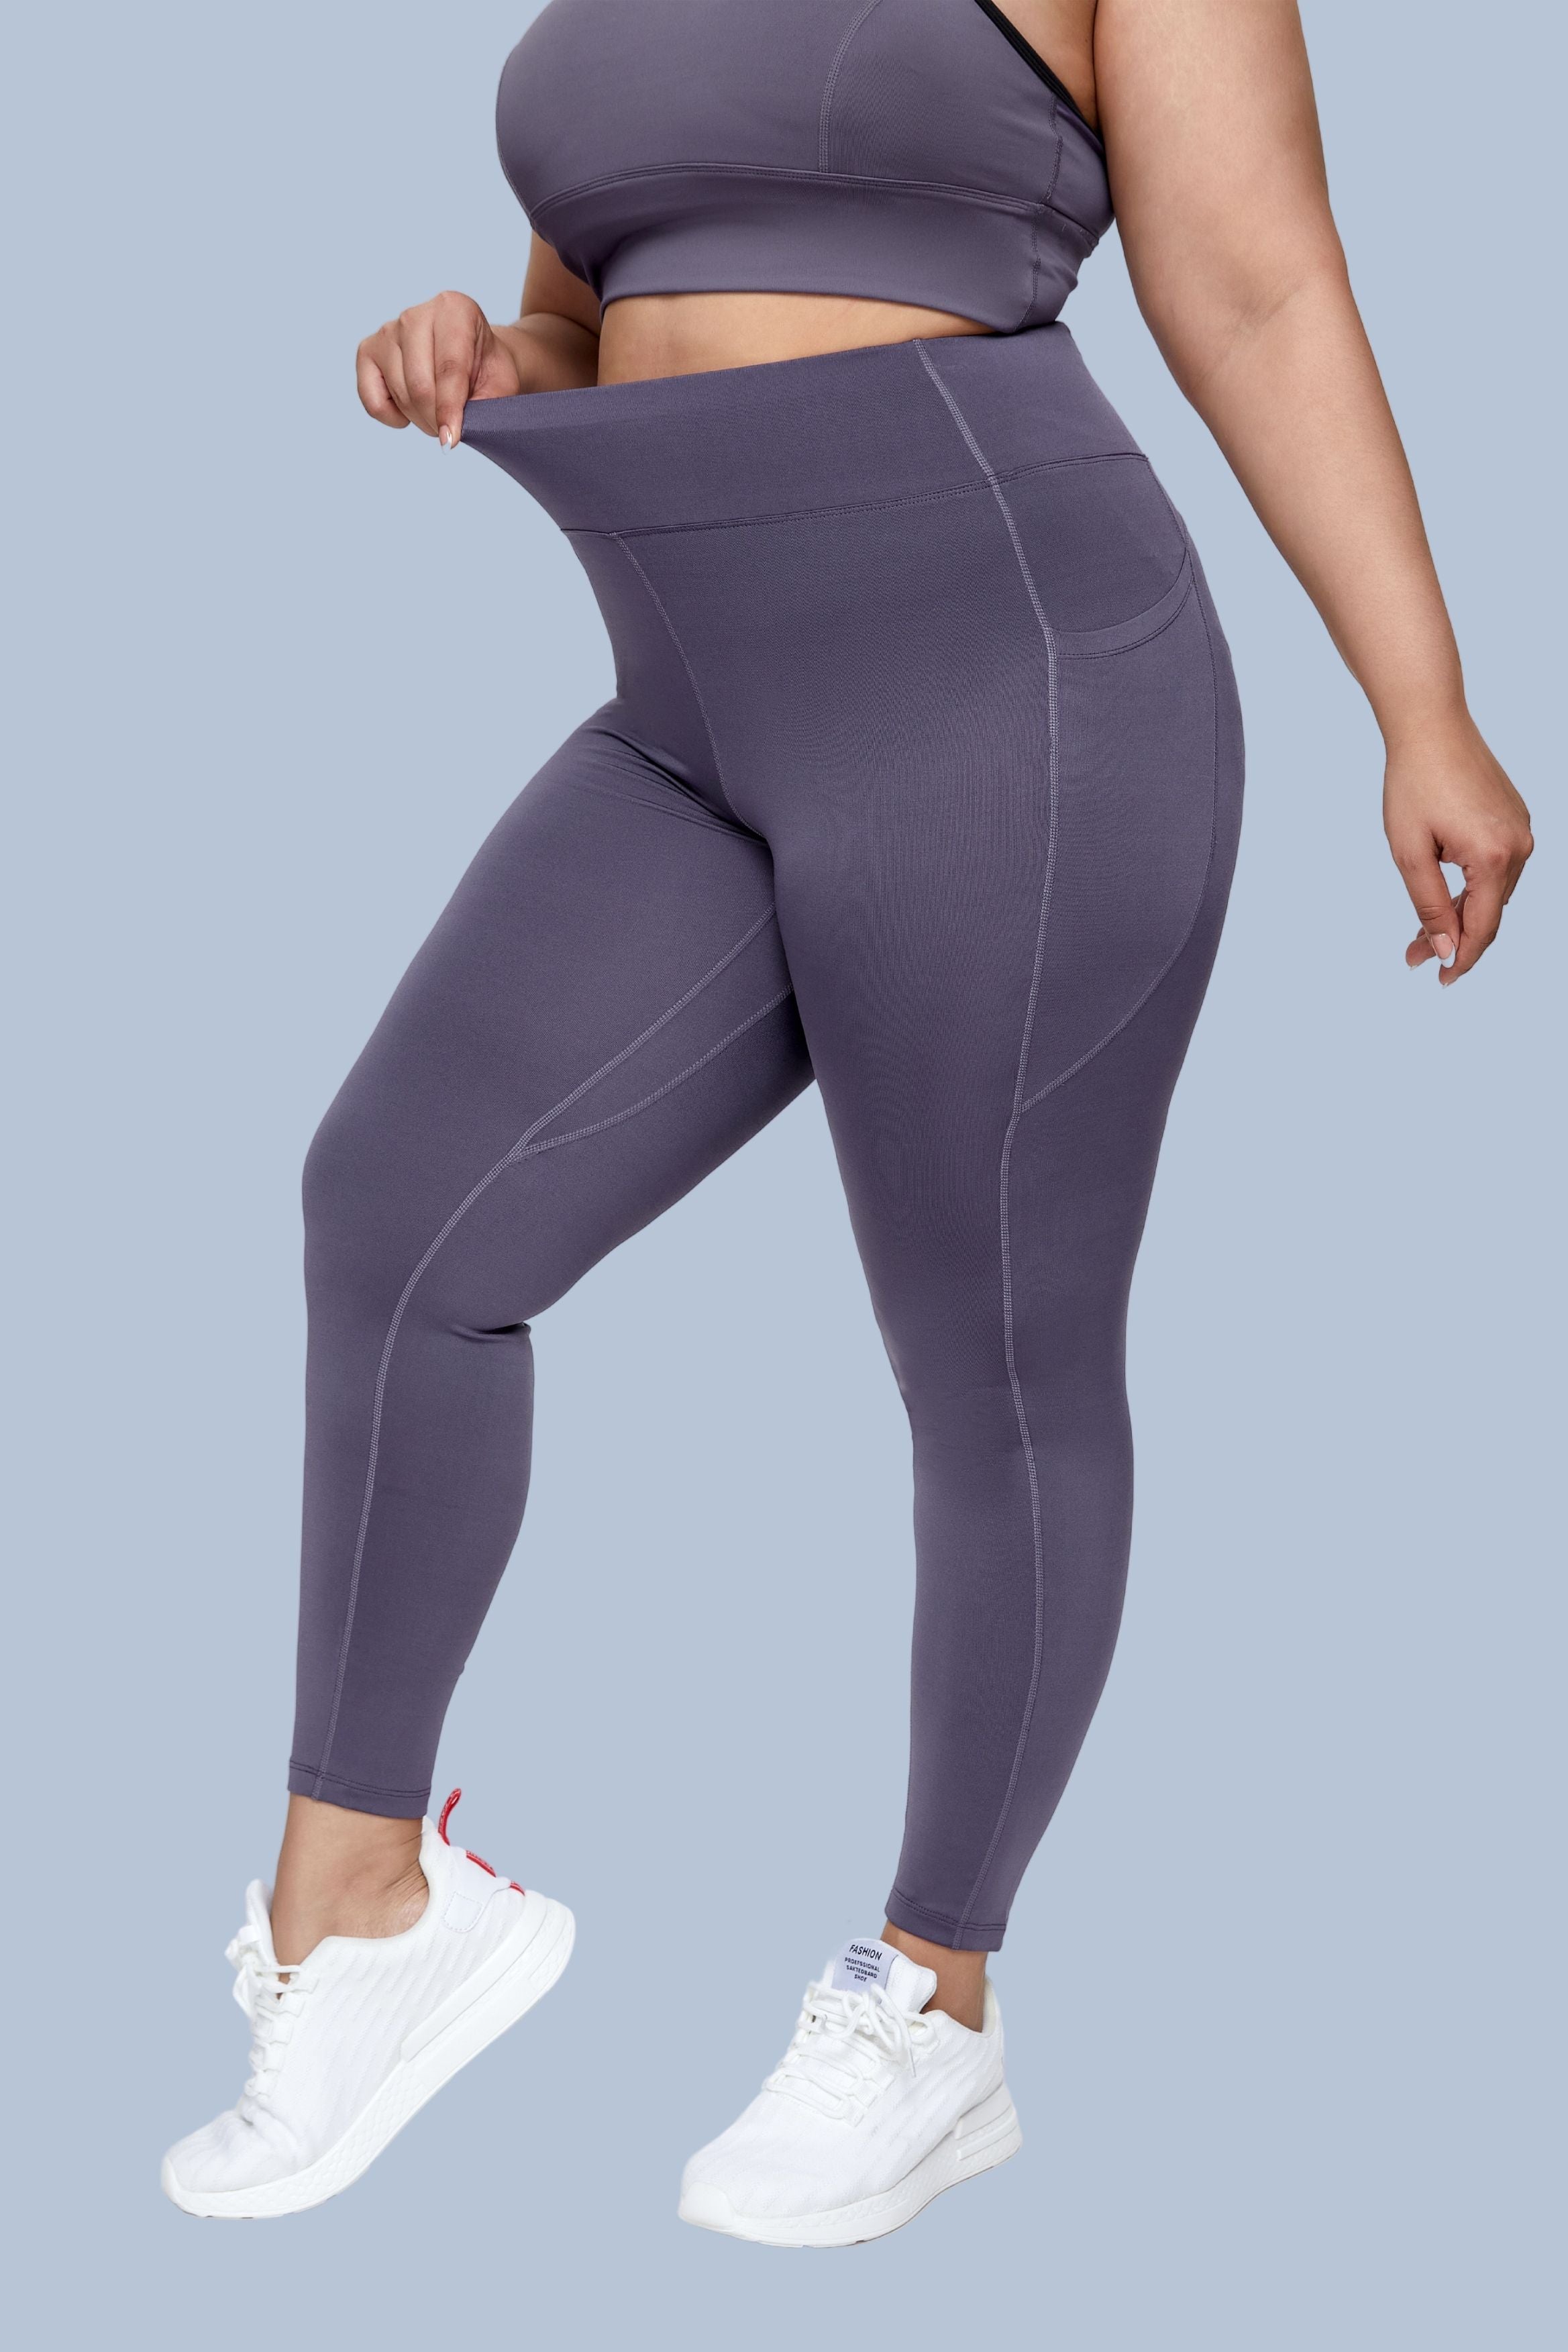 fvwitlyh Yoga Pants with Pockets for Women plus Size Five-point Yoga  Leggings Pocket Fitness Womens plus Size Yoga Pants Cotton 